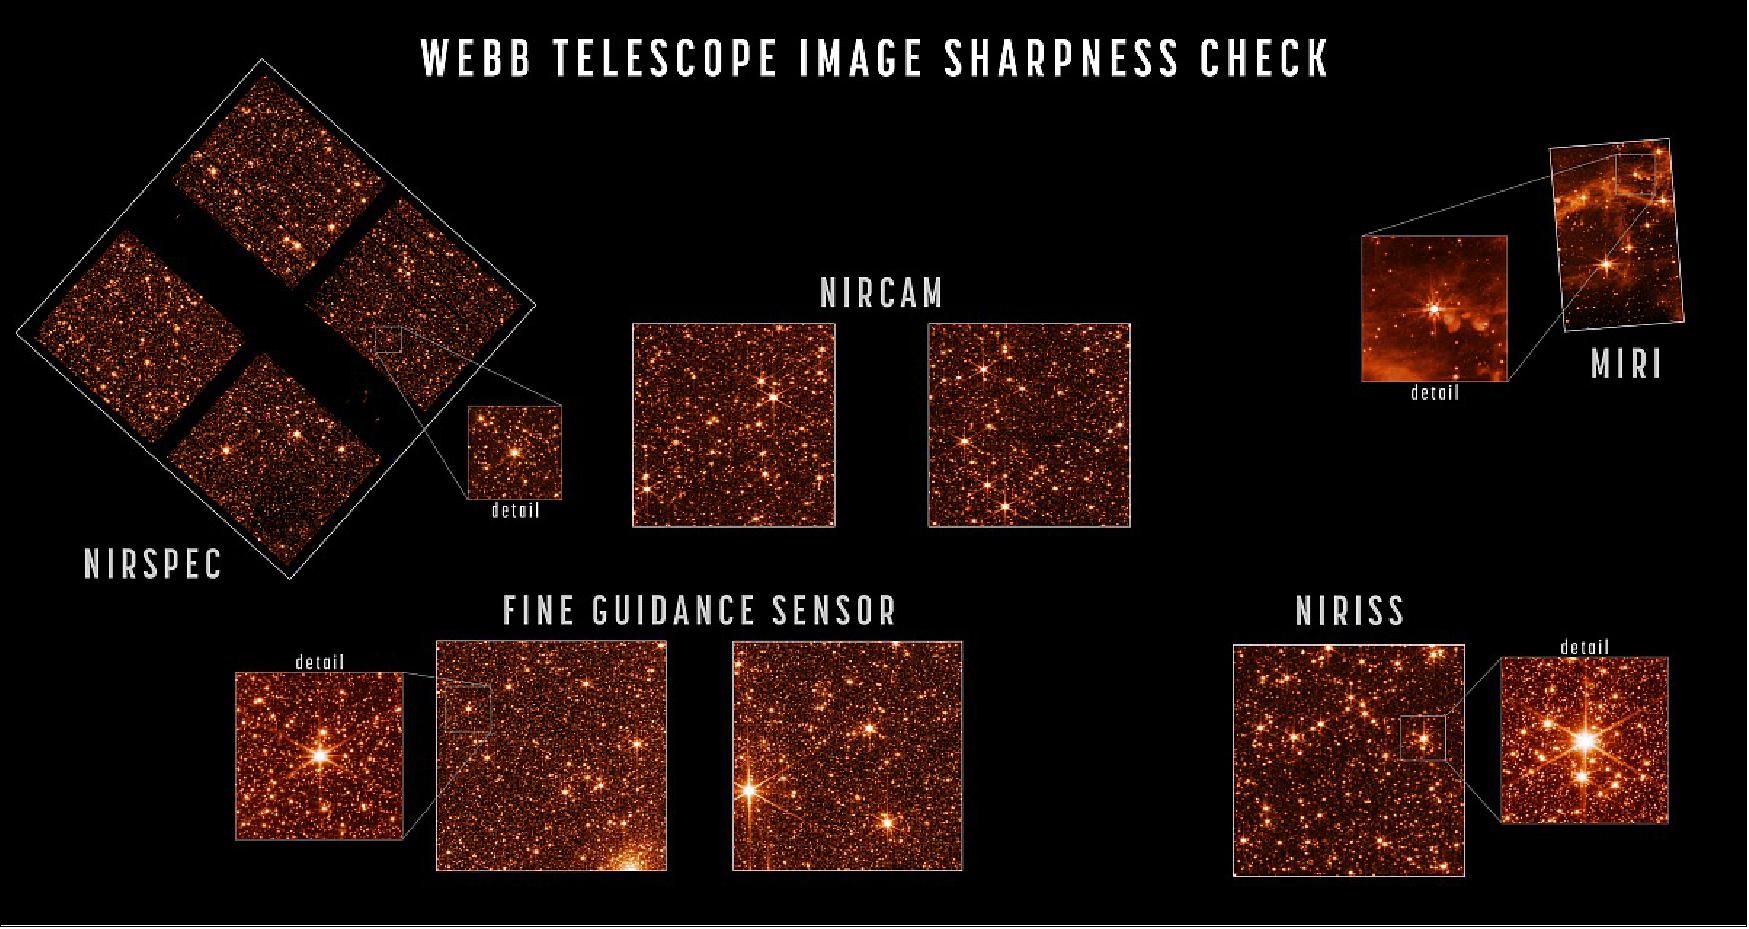 Figure 20: Engineering images of sharply focused stars in the field of view of each instrument demonstrate that the telescope is fully aligned and in focus. For this test, Webb pointed at part of the Large Magellanic Cloud, a small satellite galaxy of the Milky Way, providing a dense field of hundreds of thousands of stars across all the observatory's sensors. The sizes and positions of the images shown here depict the relative arrangement of each of Webb's instruments in the telescope's focal plane, each pointing at a slightly offset part of the sky relative to one another. Webb's three imaging instruments are NIRCam (images shown here at a wavelength of 2 µm), NIRISS (image shown here at 1.5 µm), and MIRI (shown at 7.7 µm, a longer wavelength revealing emission from interstellar clouds as well as starlight). NIRSpec is a spectrograph rather than imager but can take images, such as the 1.1 µm image shown here, for calibrations and target acquisition. The dark regions visible in parts of the NIRSpec data are due to structures of its microshutter array, which has several hundred thousand controllable shutters that can be opened or shut to select which light is sent into the spectrograph. Lastly, Webb's Fine Guidance Sensor tracks guide stars to point the observatory accurately and precisely; its two sensors are not generally used for scientific imaging but can take calibration images such as those shown here. This image data is used not just to assess image sharpness but also to precisely measure and calibrate subtle image distortions and alignments between sensors as part of Webb's overall instrument calibration process (image credit: NASA/STScI)